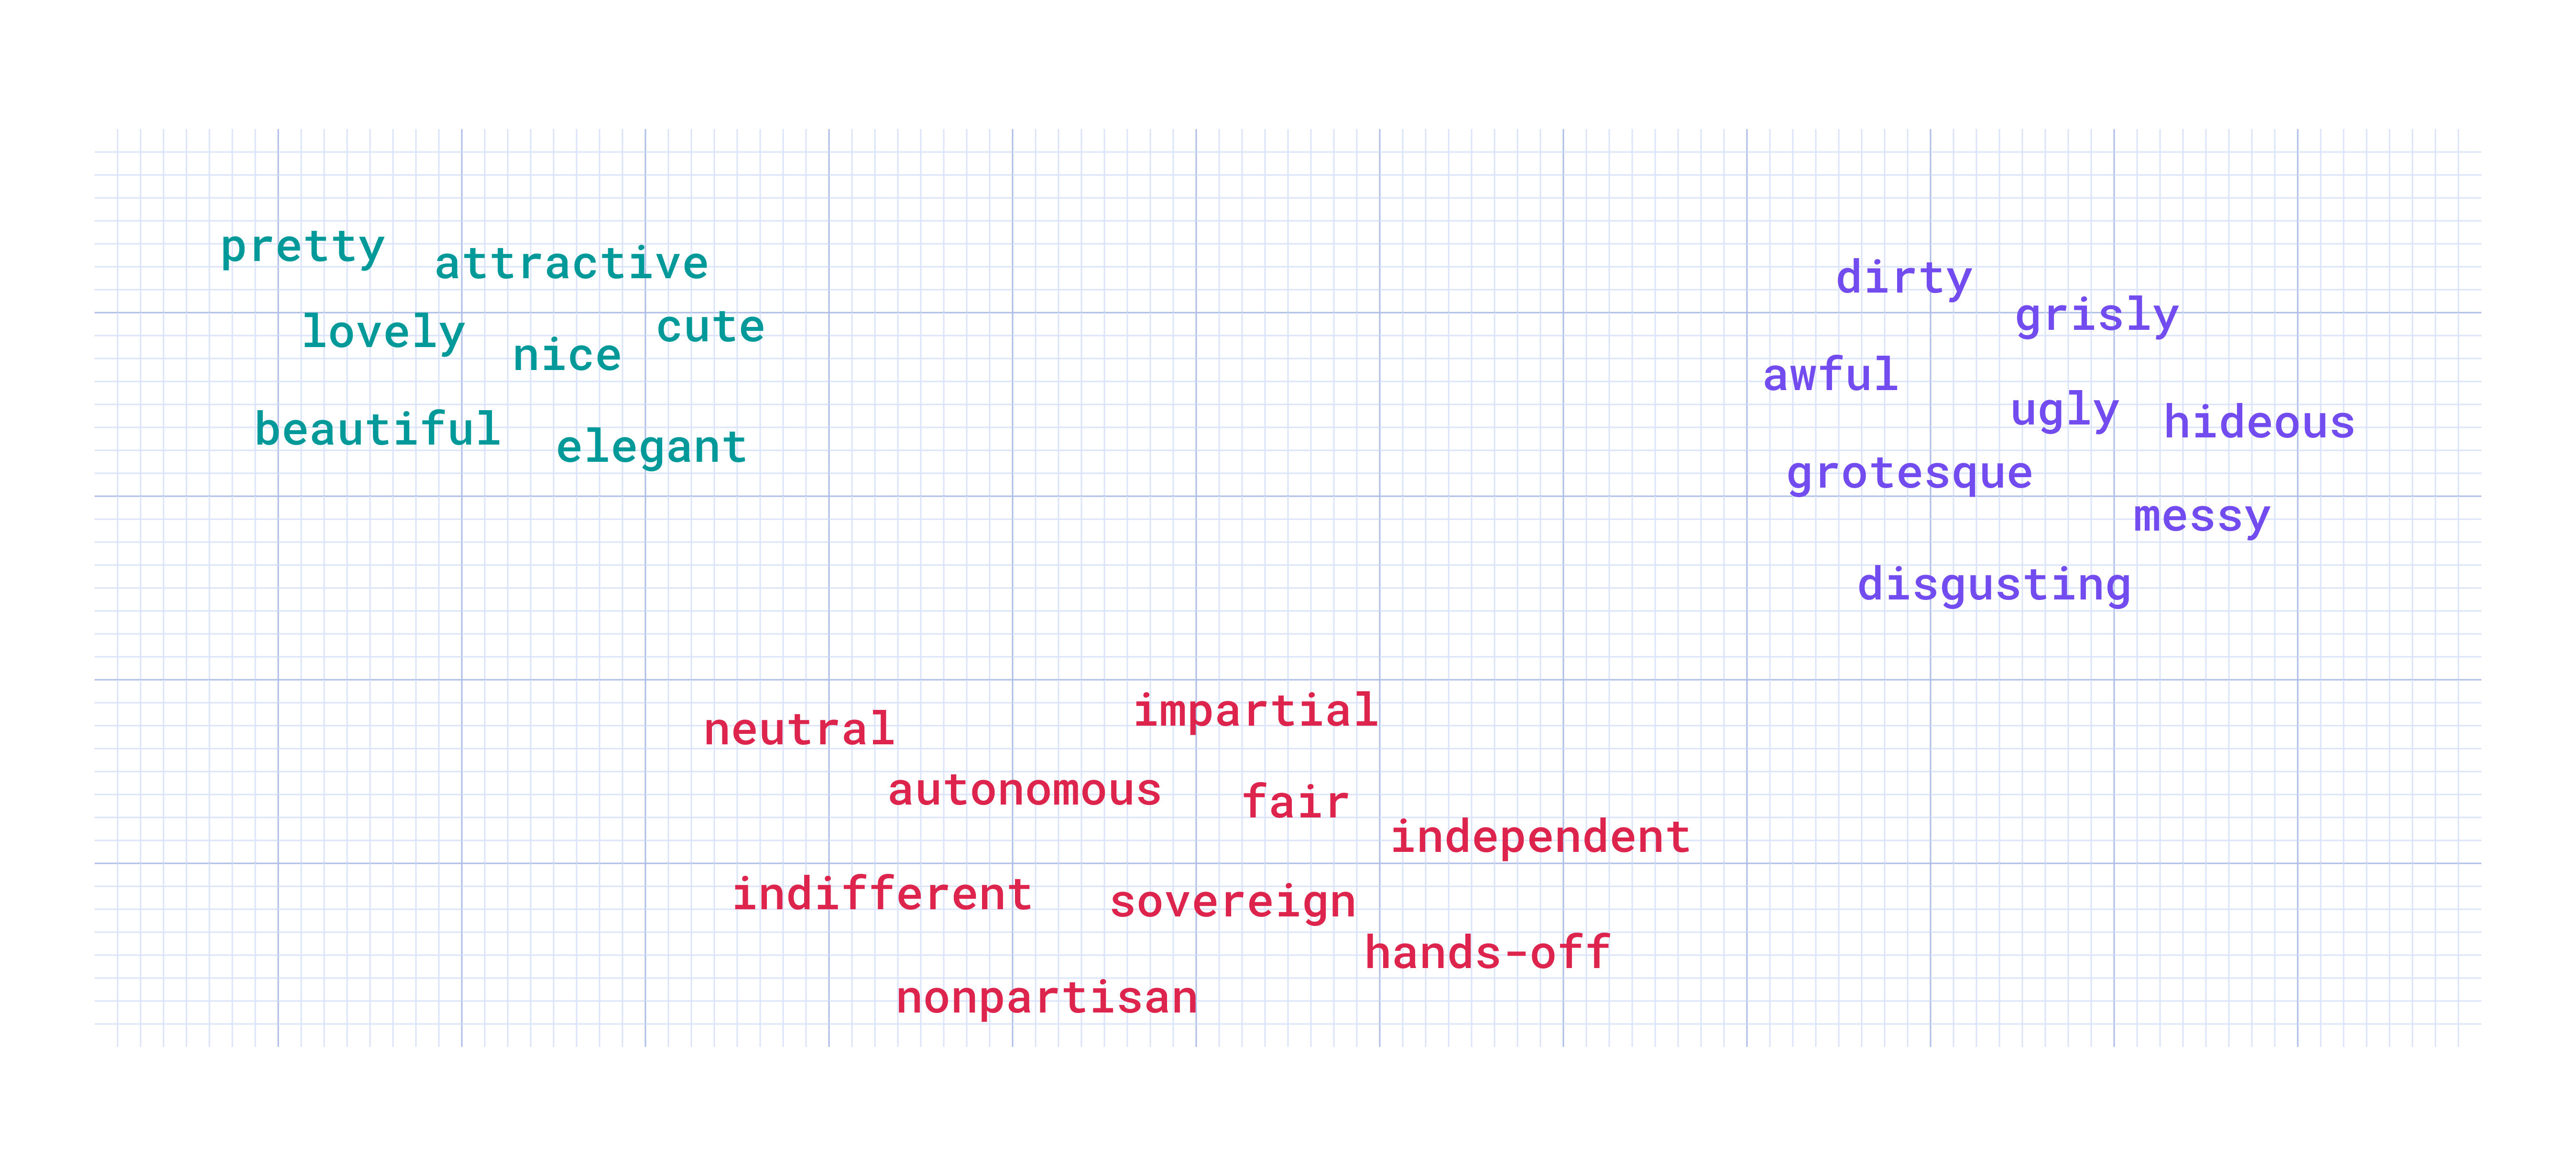 Example of how synonyms are placed closer together in the embeddings space